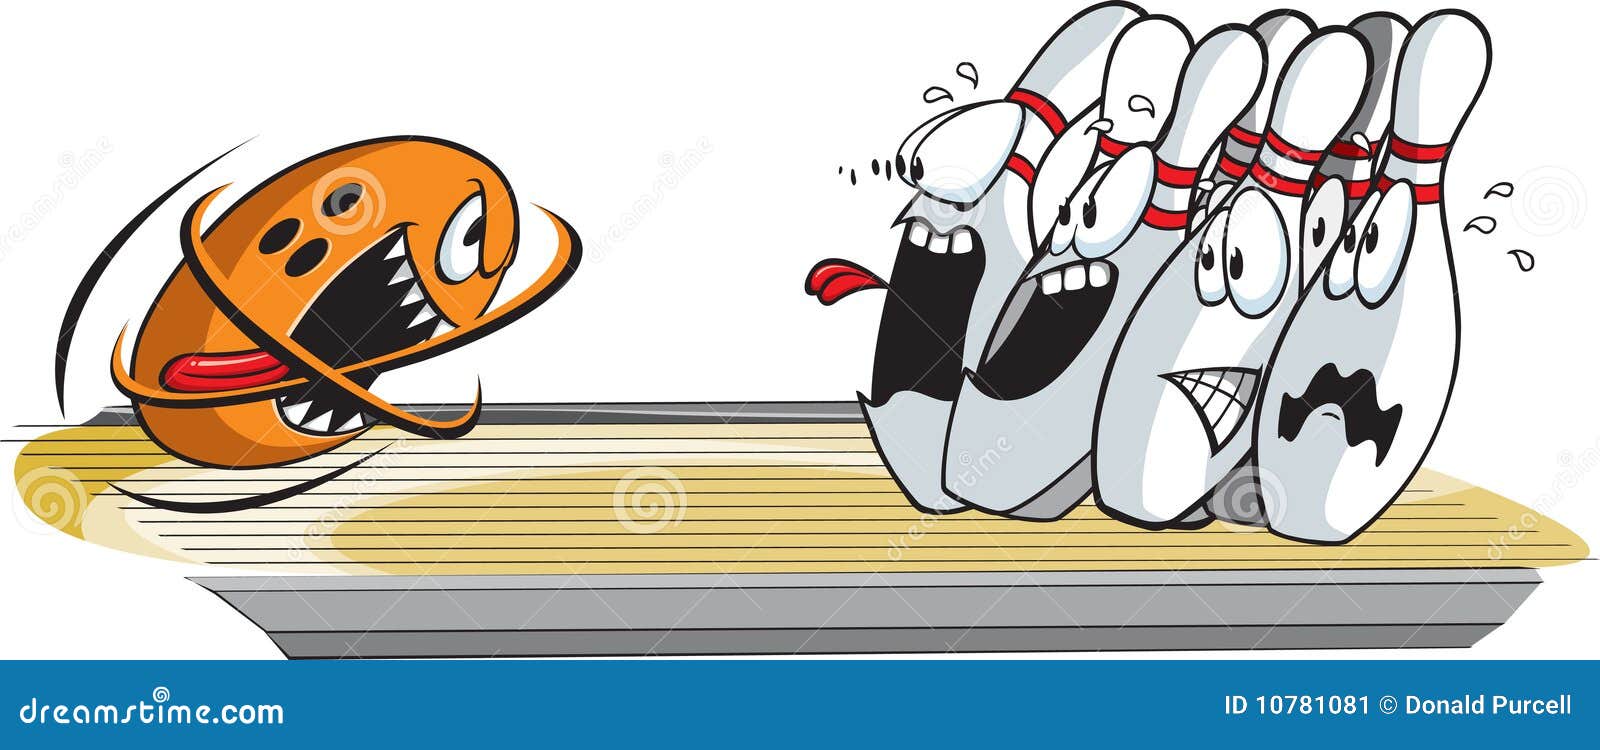 bowling clipart funny - photo #40